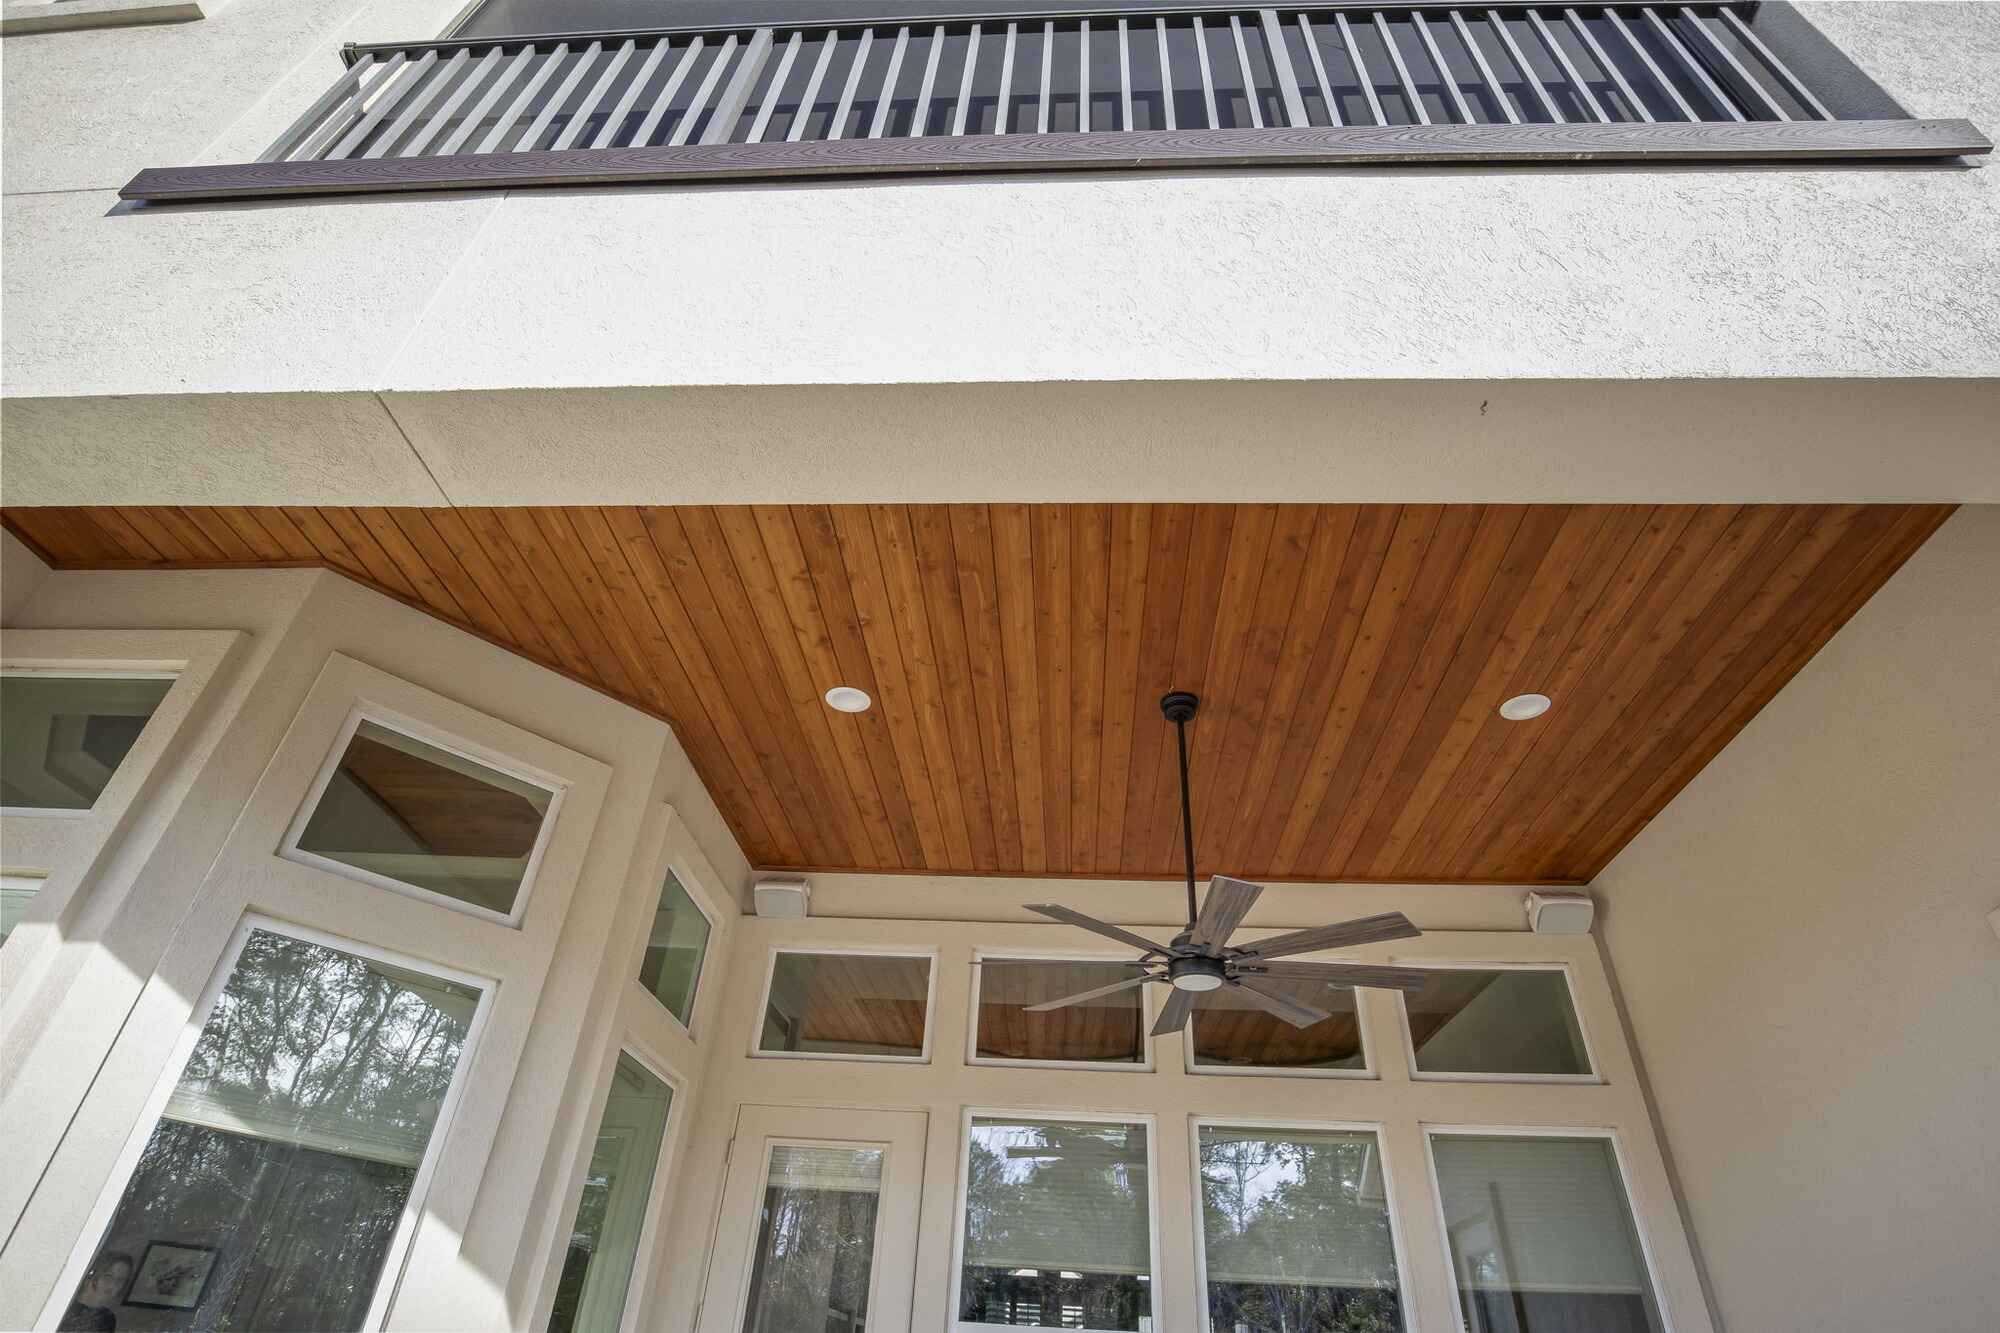 Tongue and Groove Ceiling with Lighting and Outdoor Fan